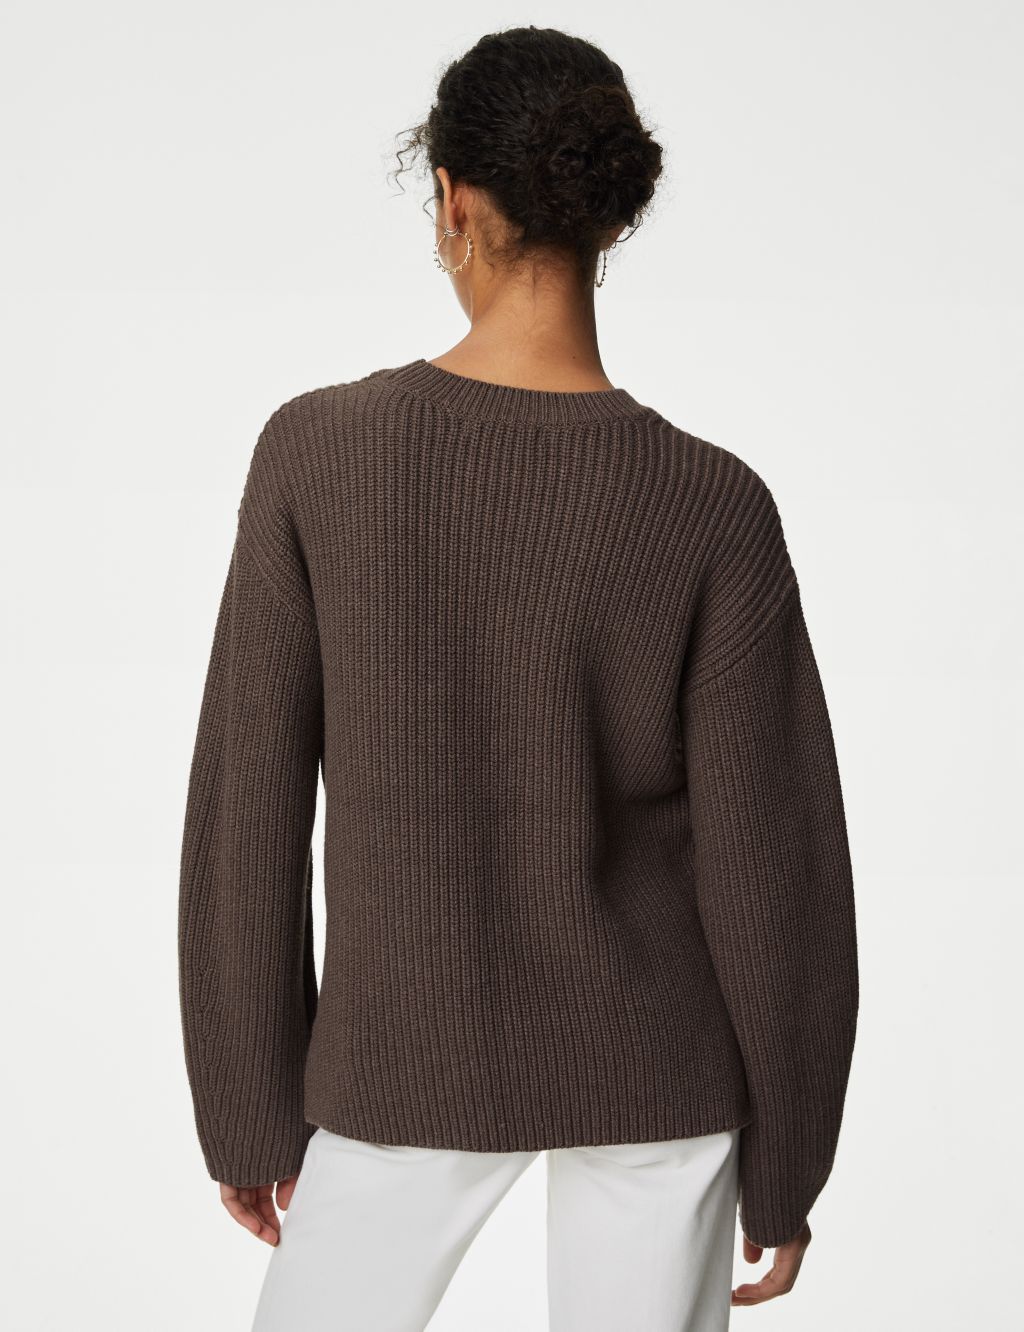 Cotton Rich Ribbed Jumper with Merino Wool image 5